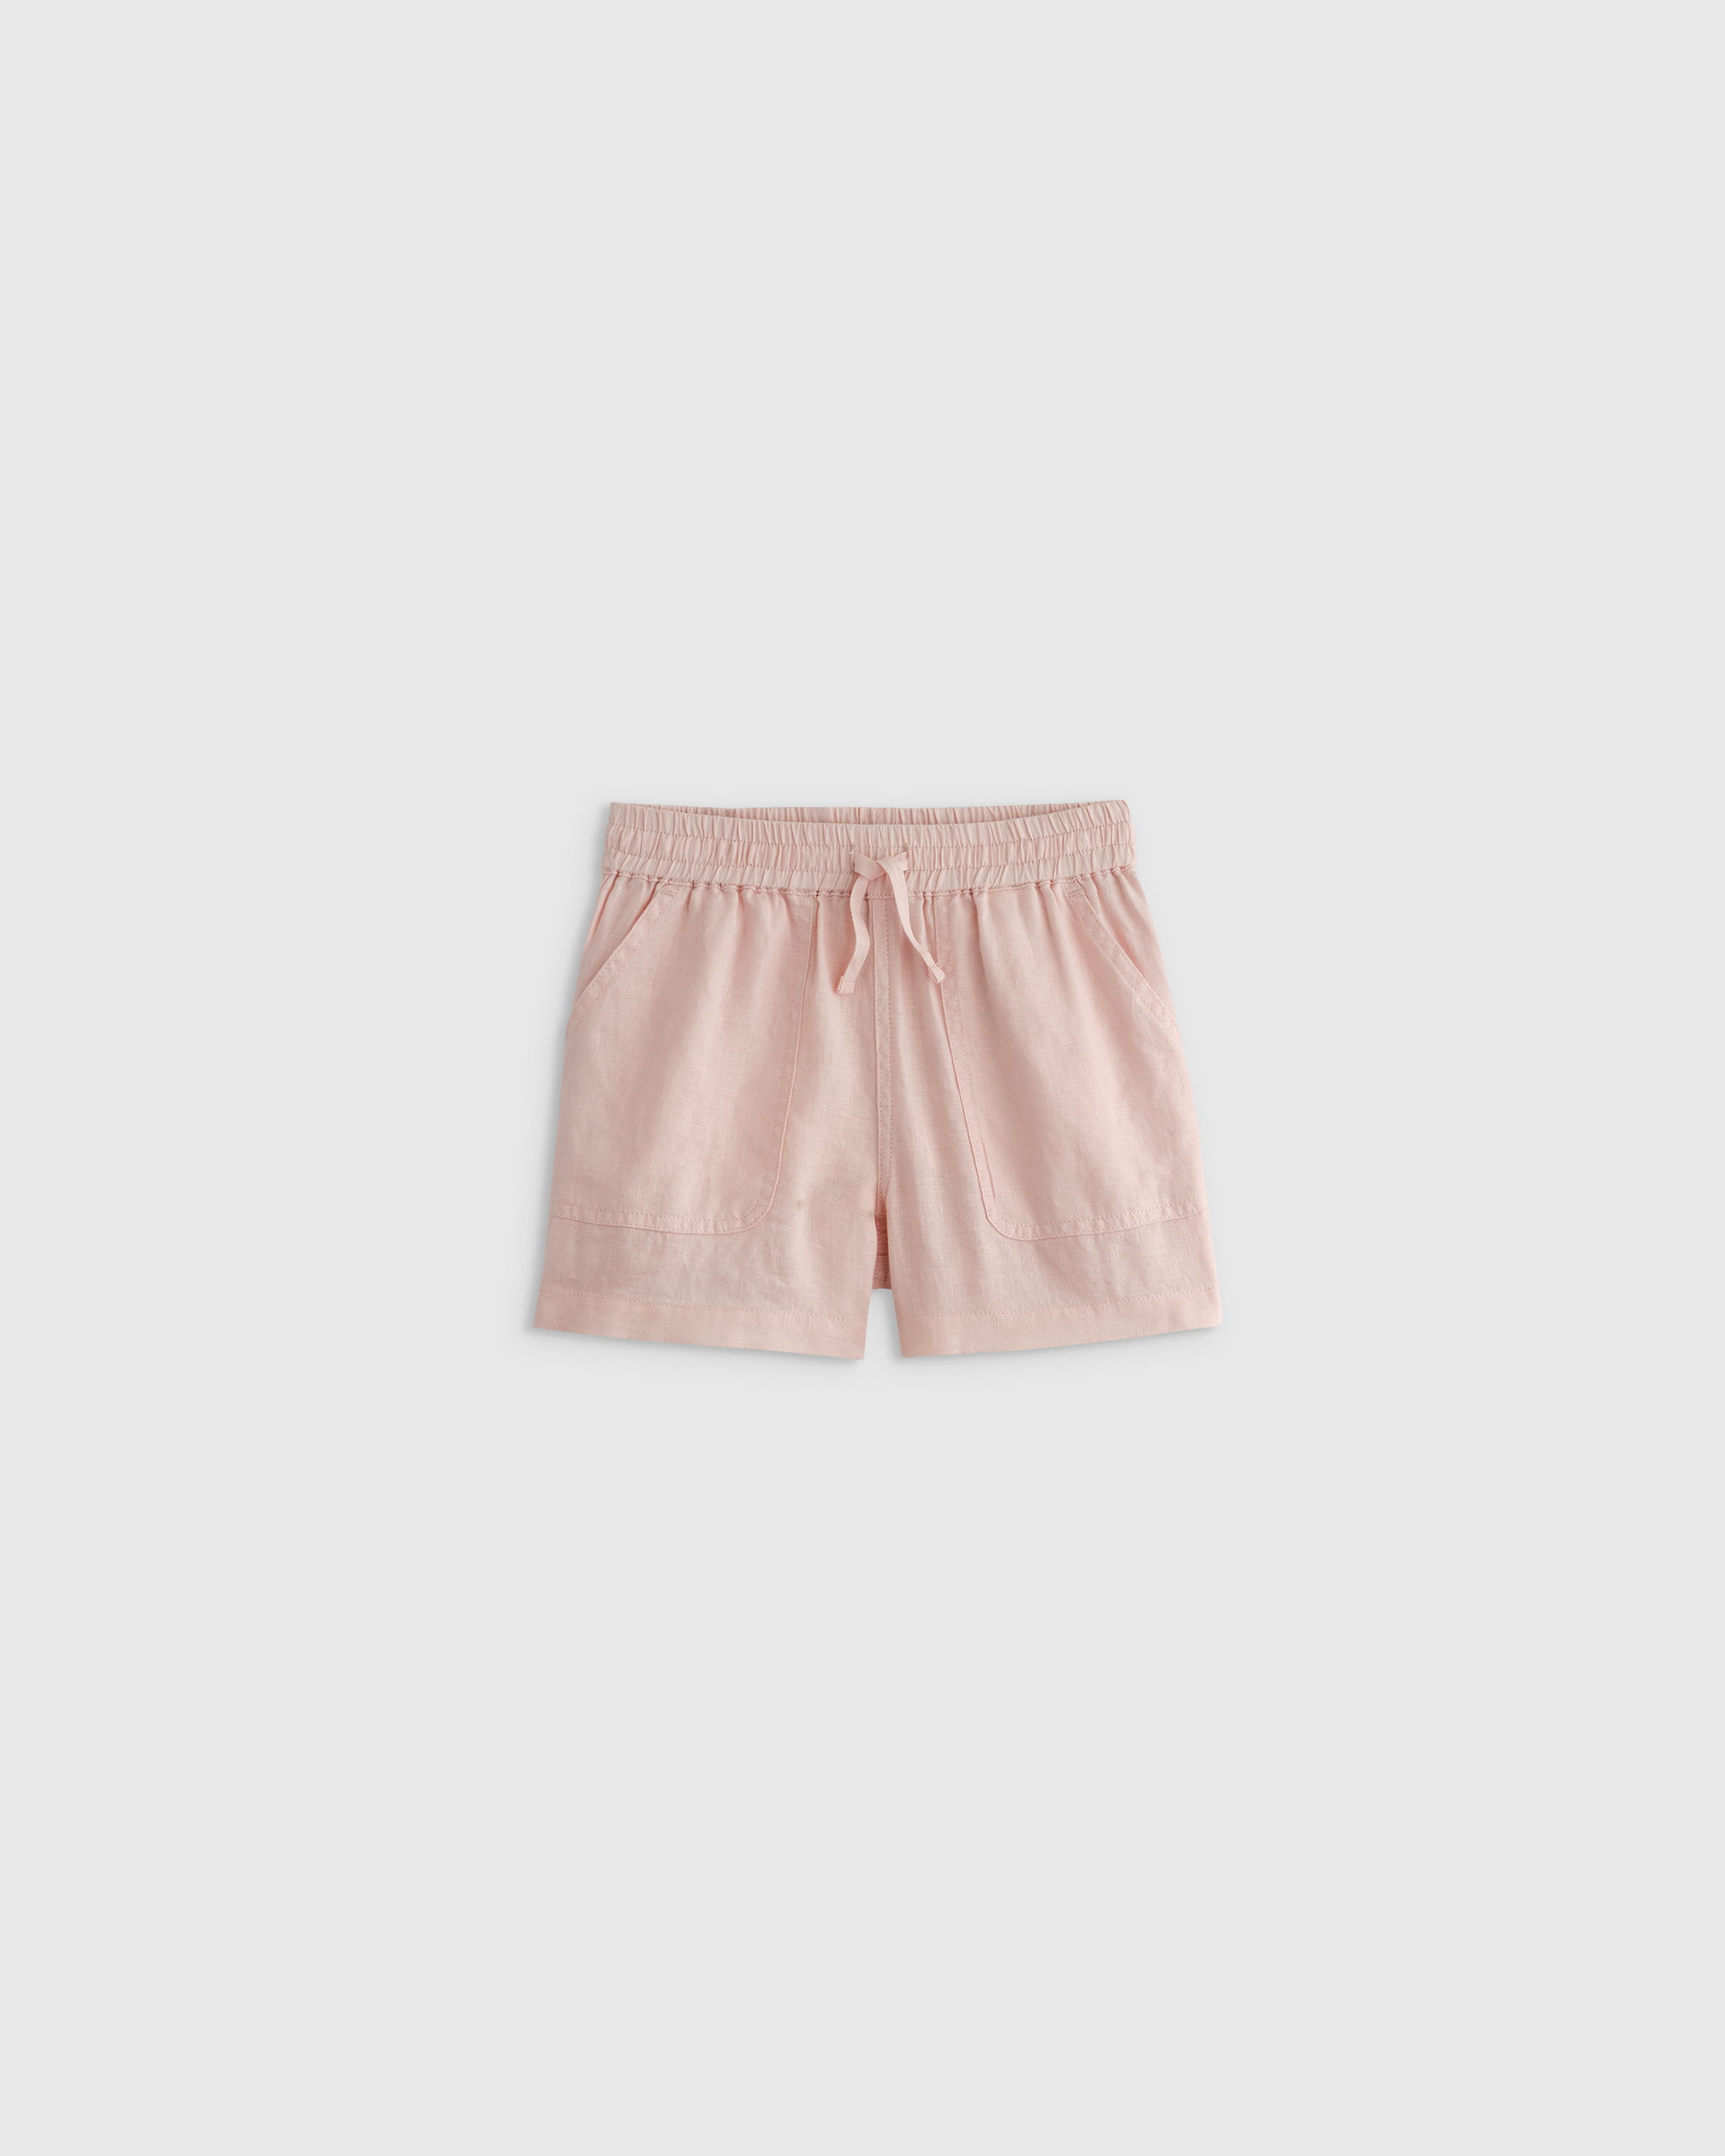 Quince 100% European Linen Drawstring Shorts In Pale Pink